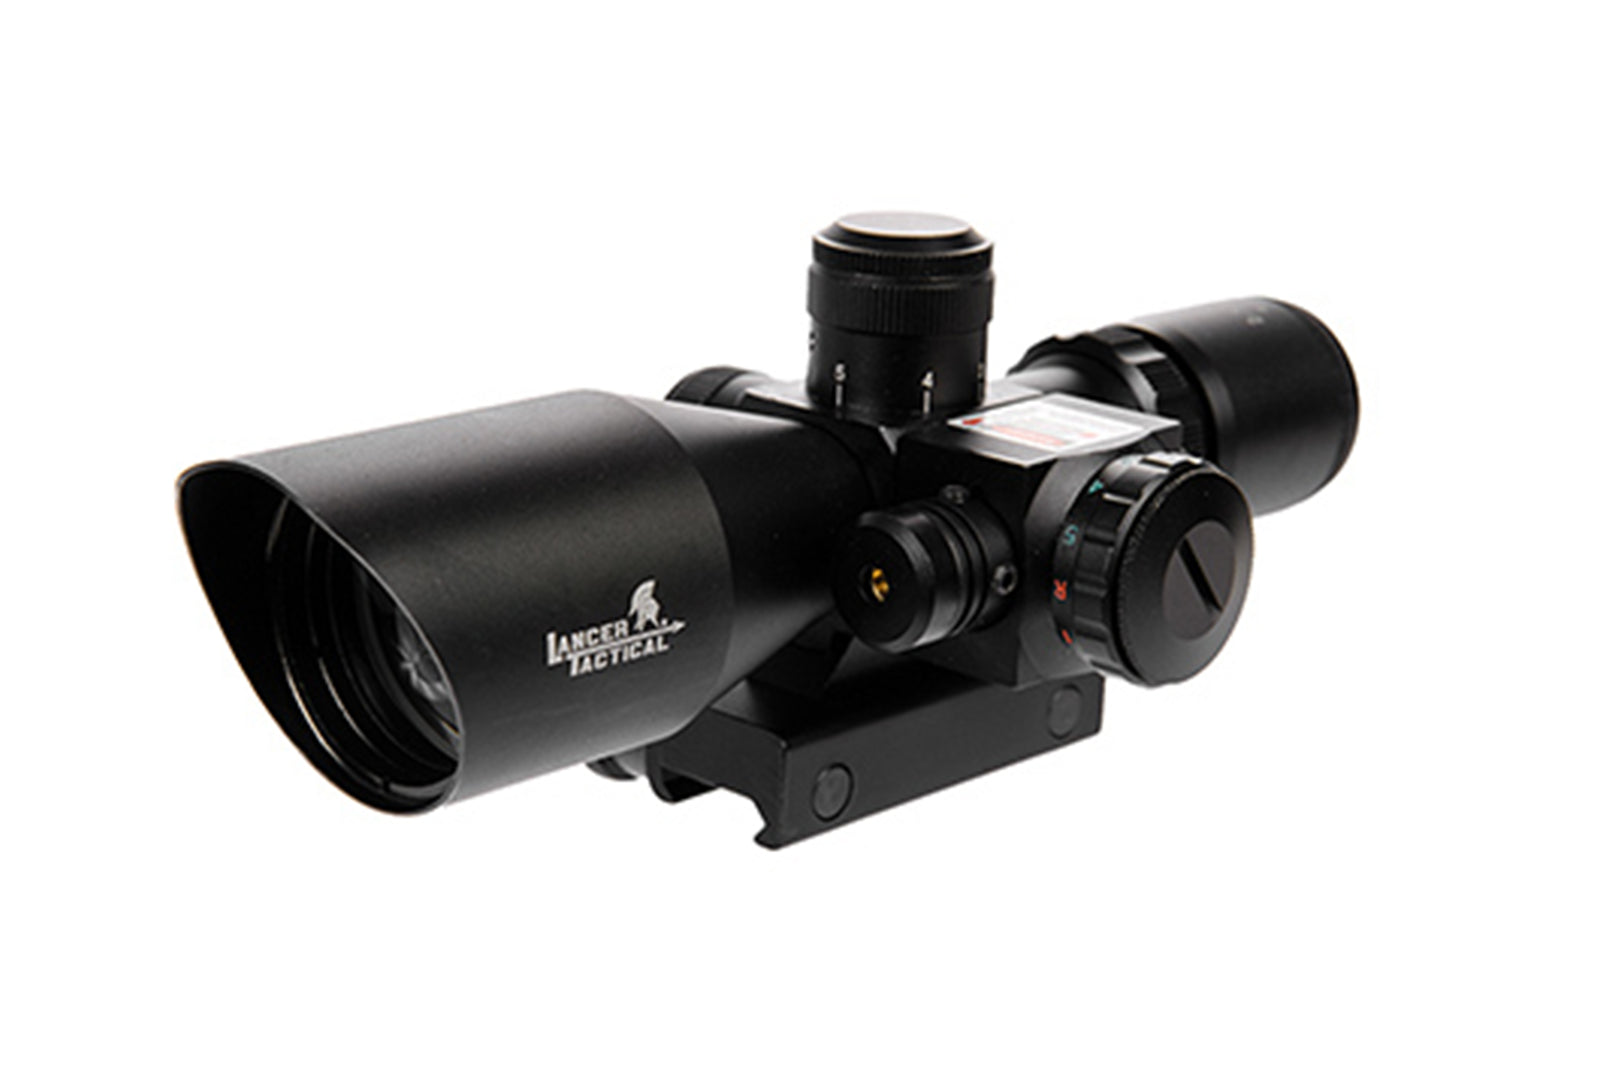 CA-414B 2.5-10X40 RED & GREEN DUAL ILLUMINATED SCOPE AND LASER